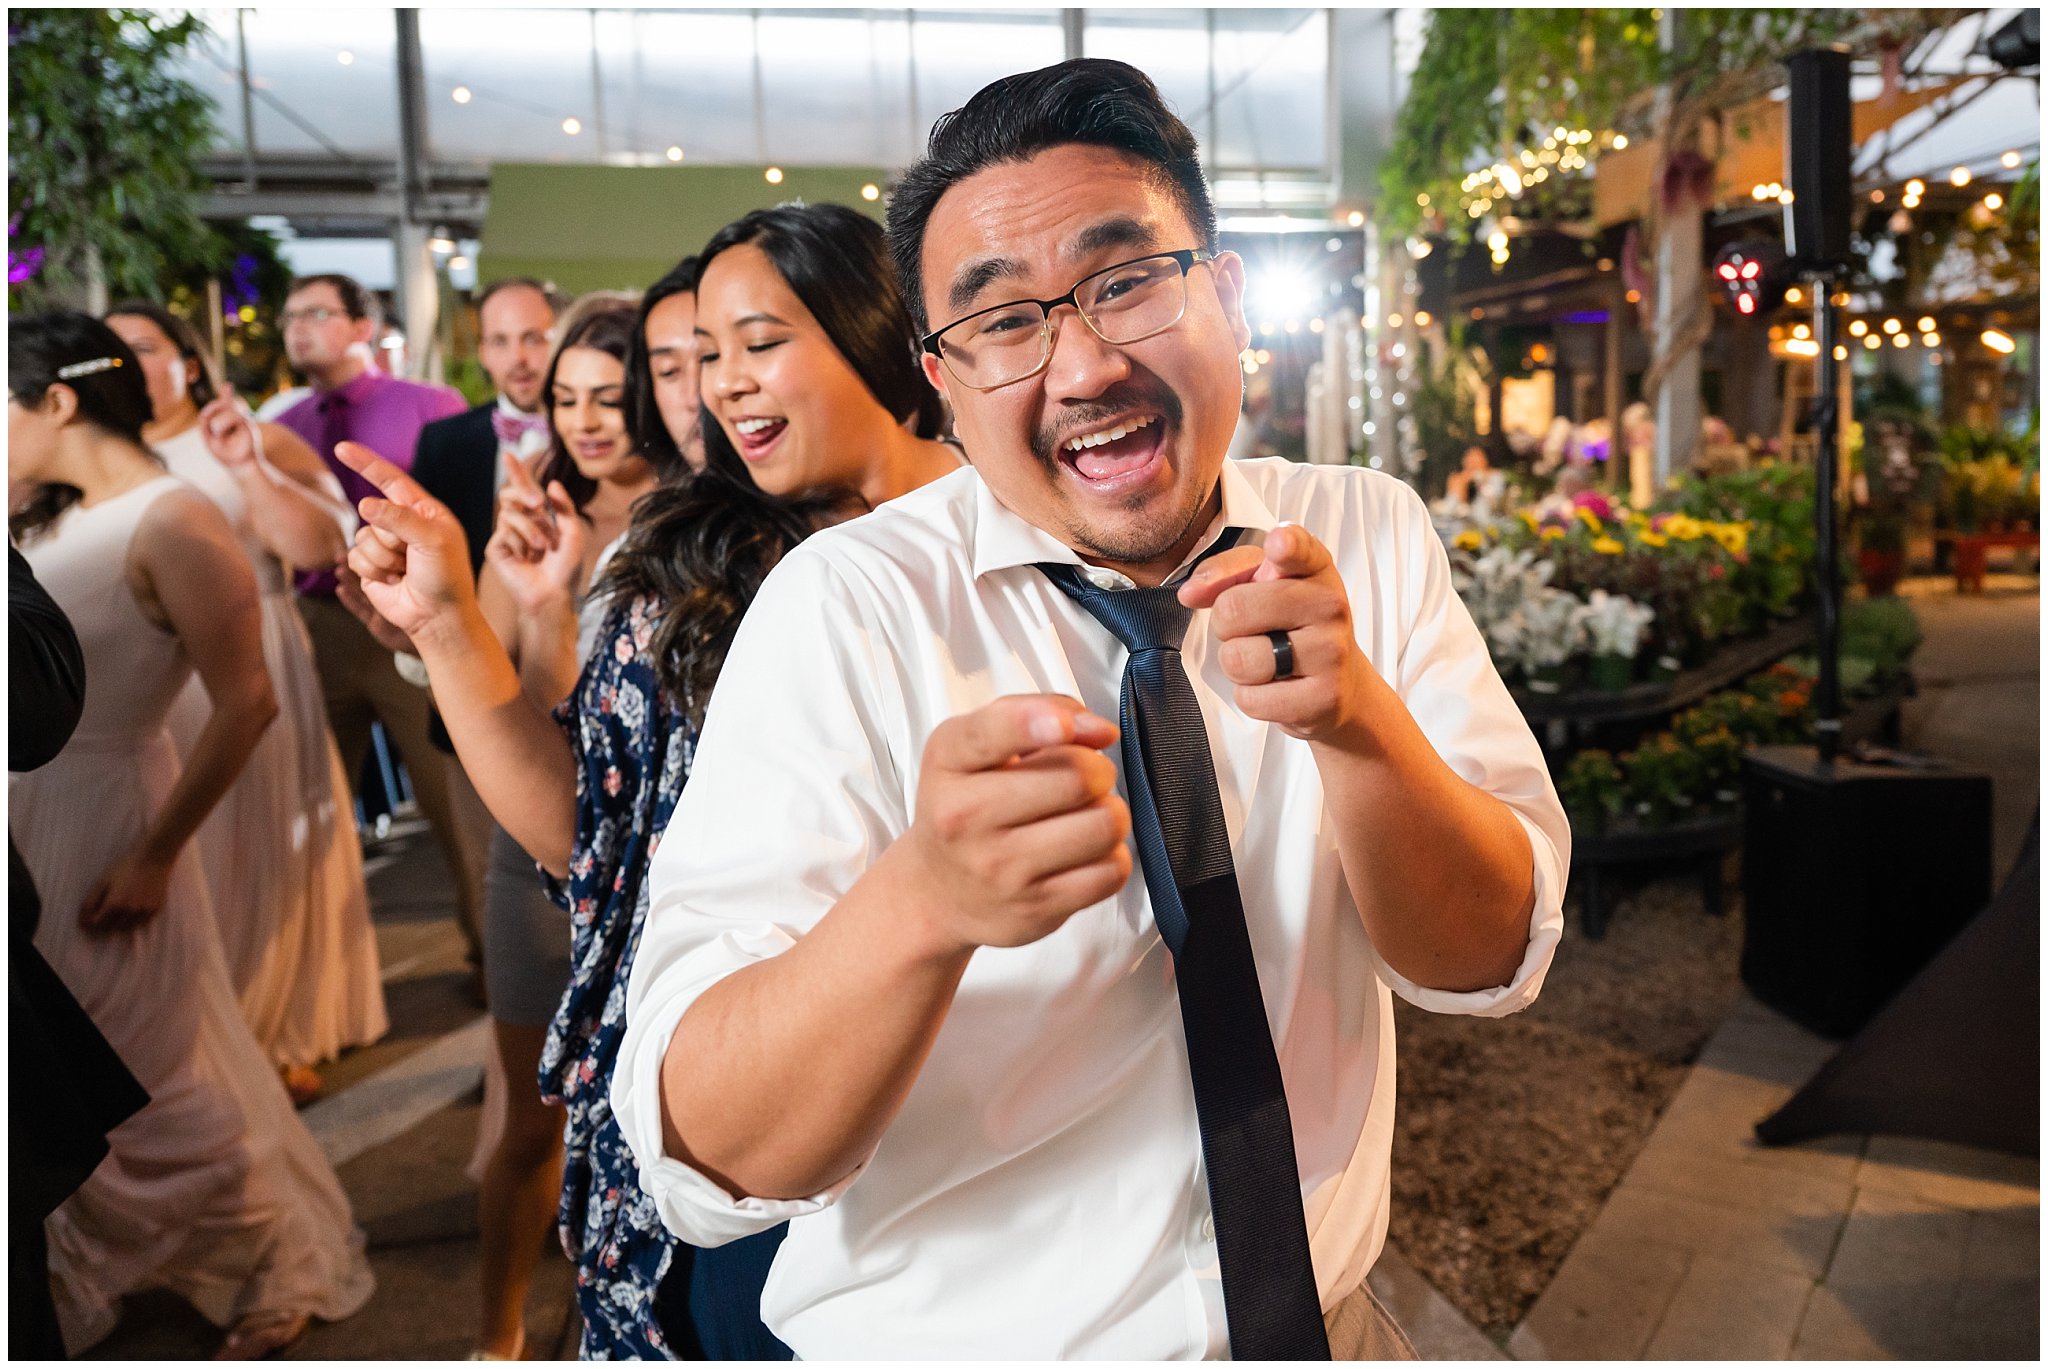 Greenhouse reception at Cactus and Tropicals | Cactus and Tropicals and Salt Lake Church Wedding | Jessie and Dallin Photography